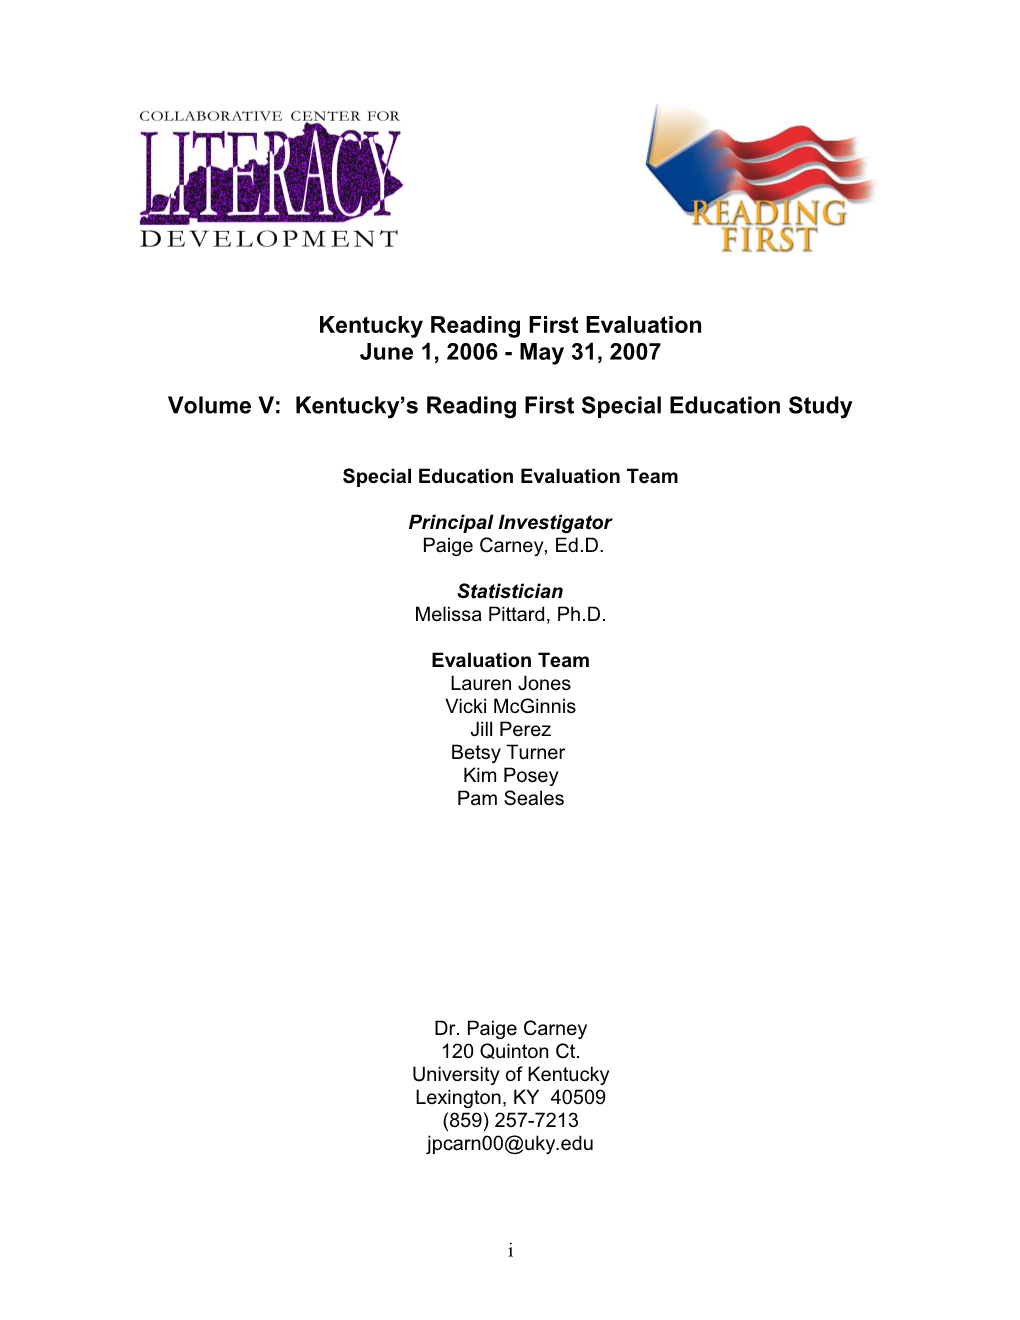 Kentucky Special Education Reading First Evaluation